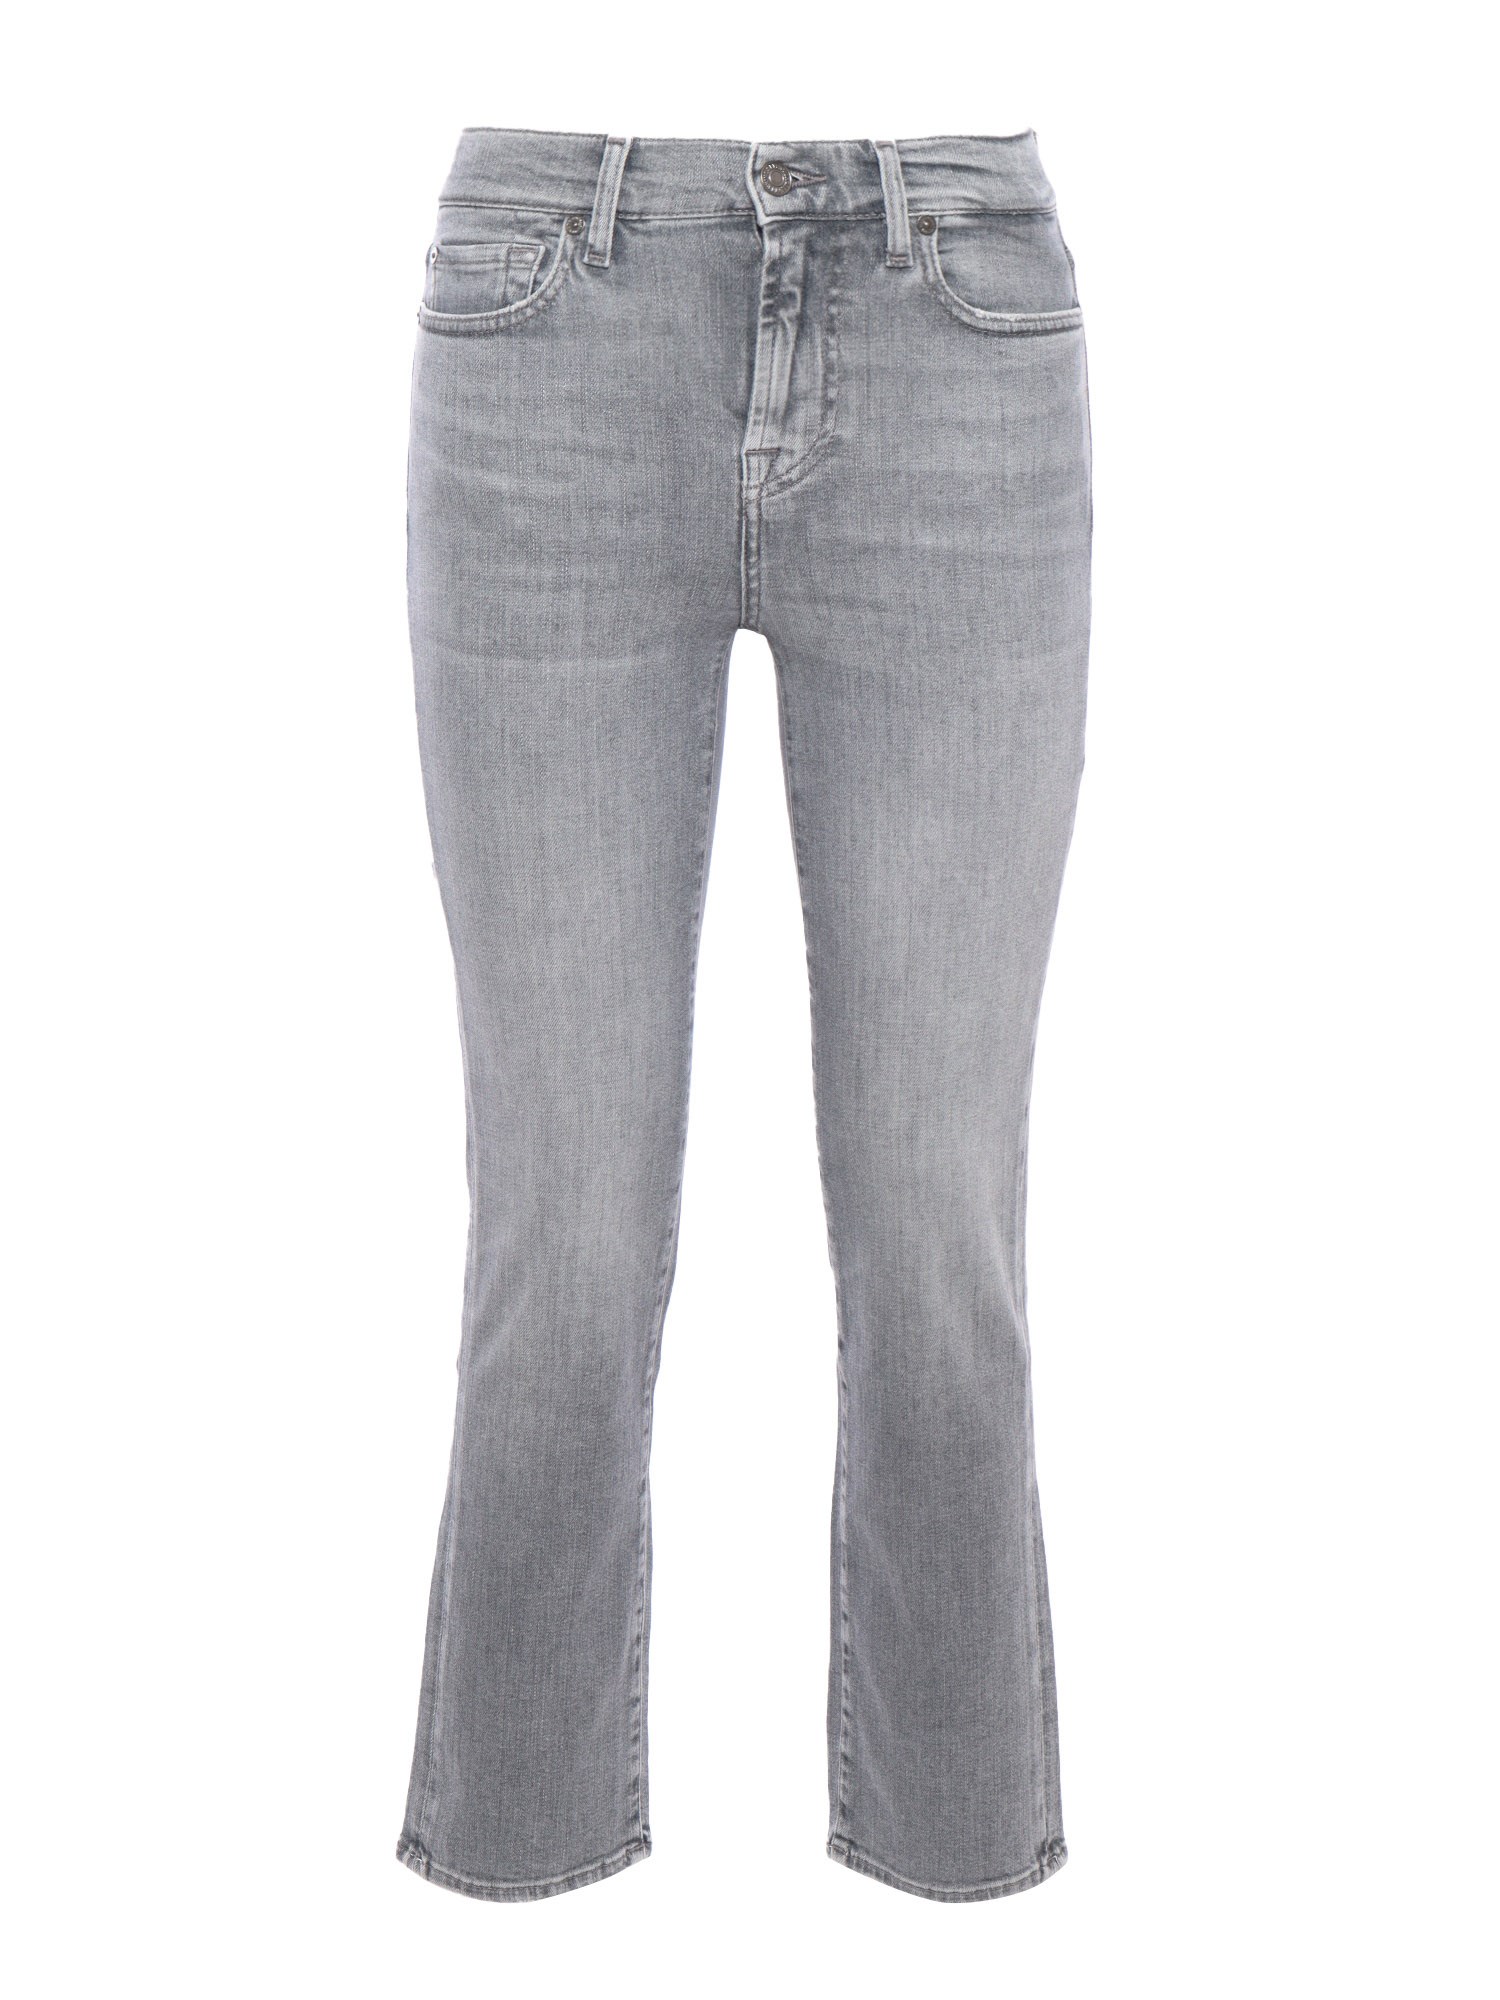 7 For All Mankind Cropped Womens Jeans. In Gray